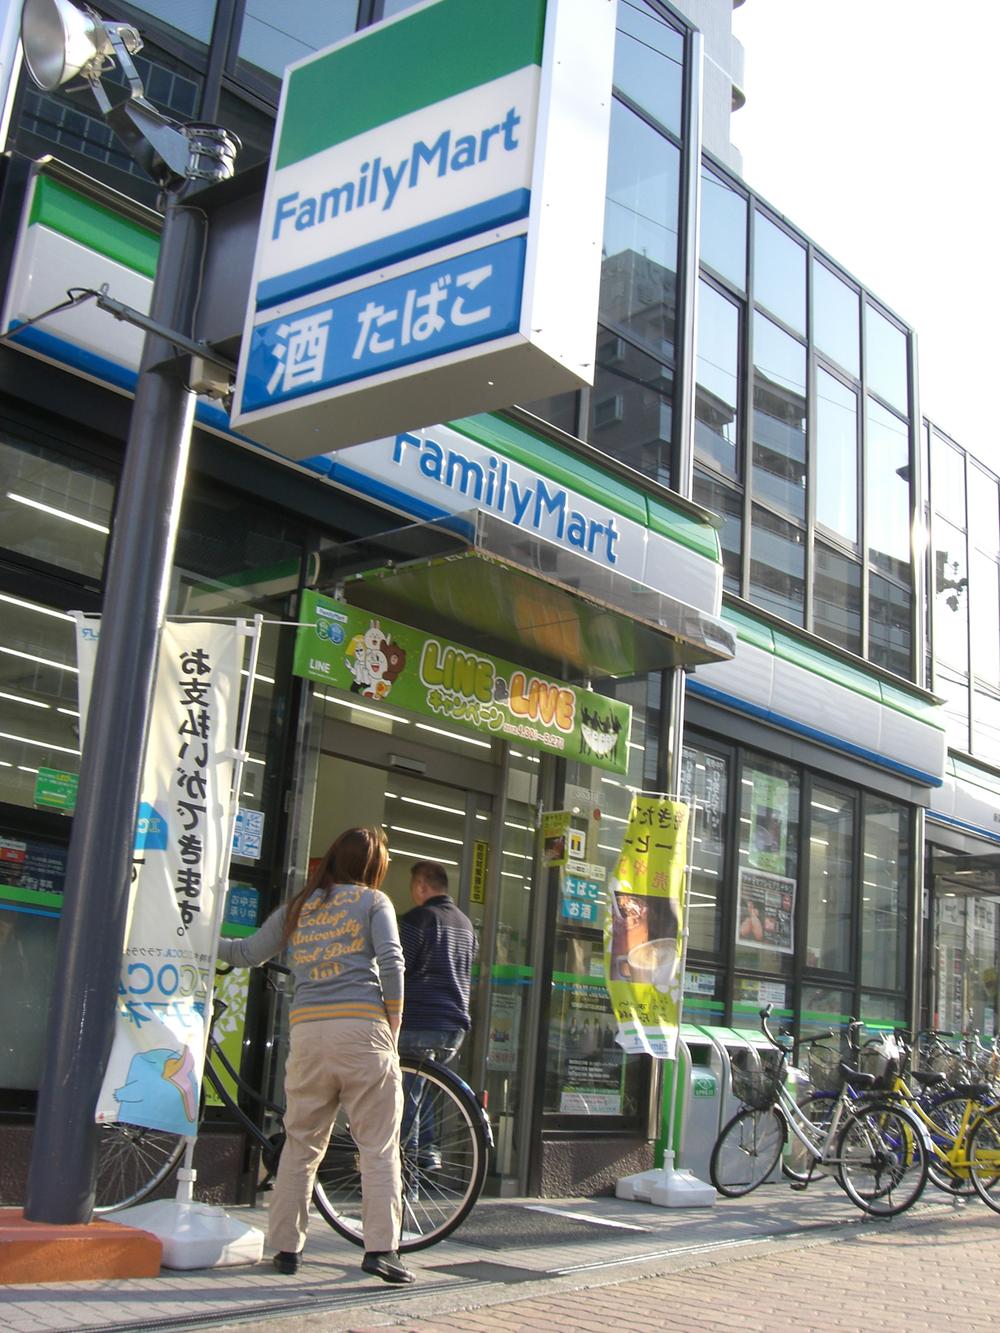 Convenience store. It 350m Station near the convenience store is really helpful to FamilyMart.